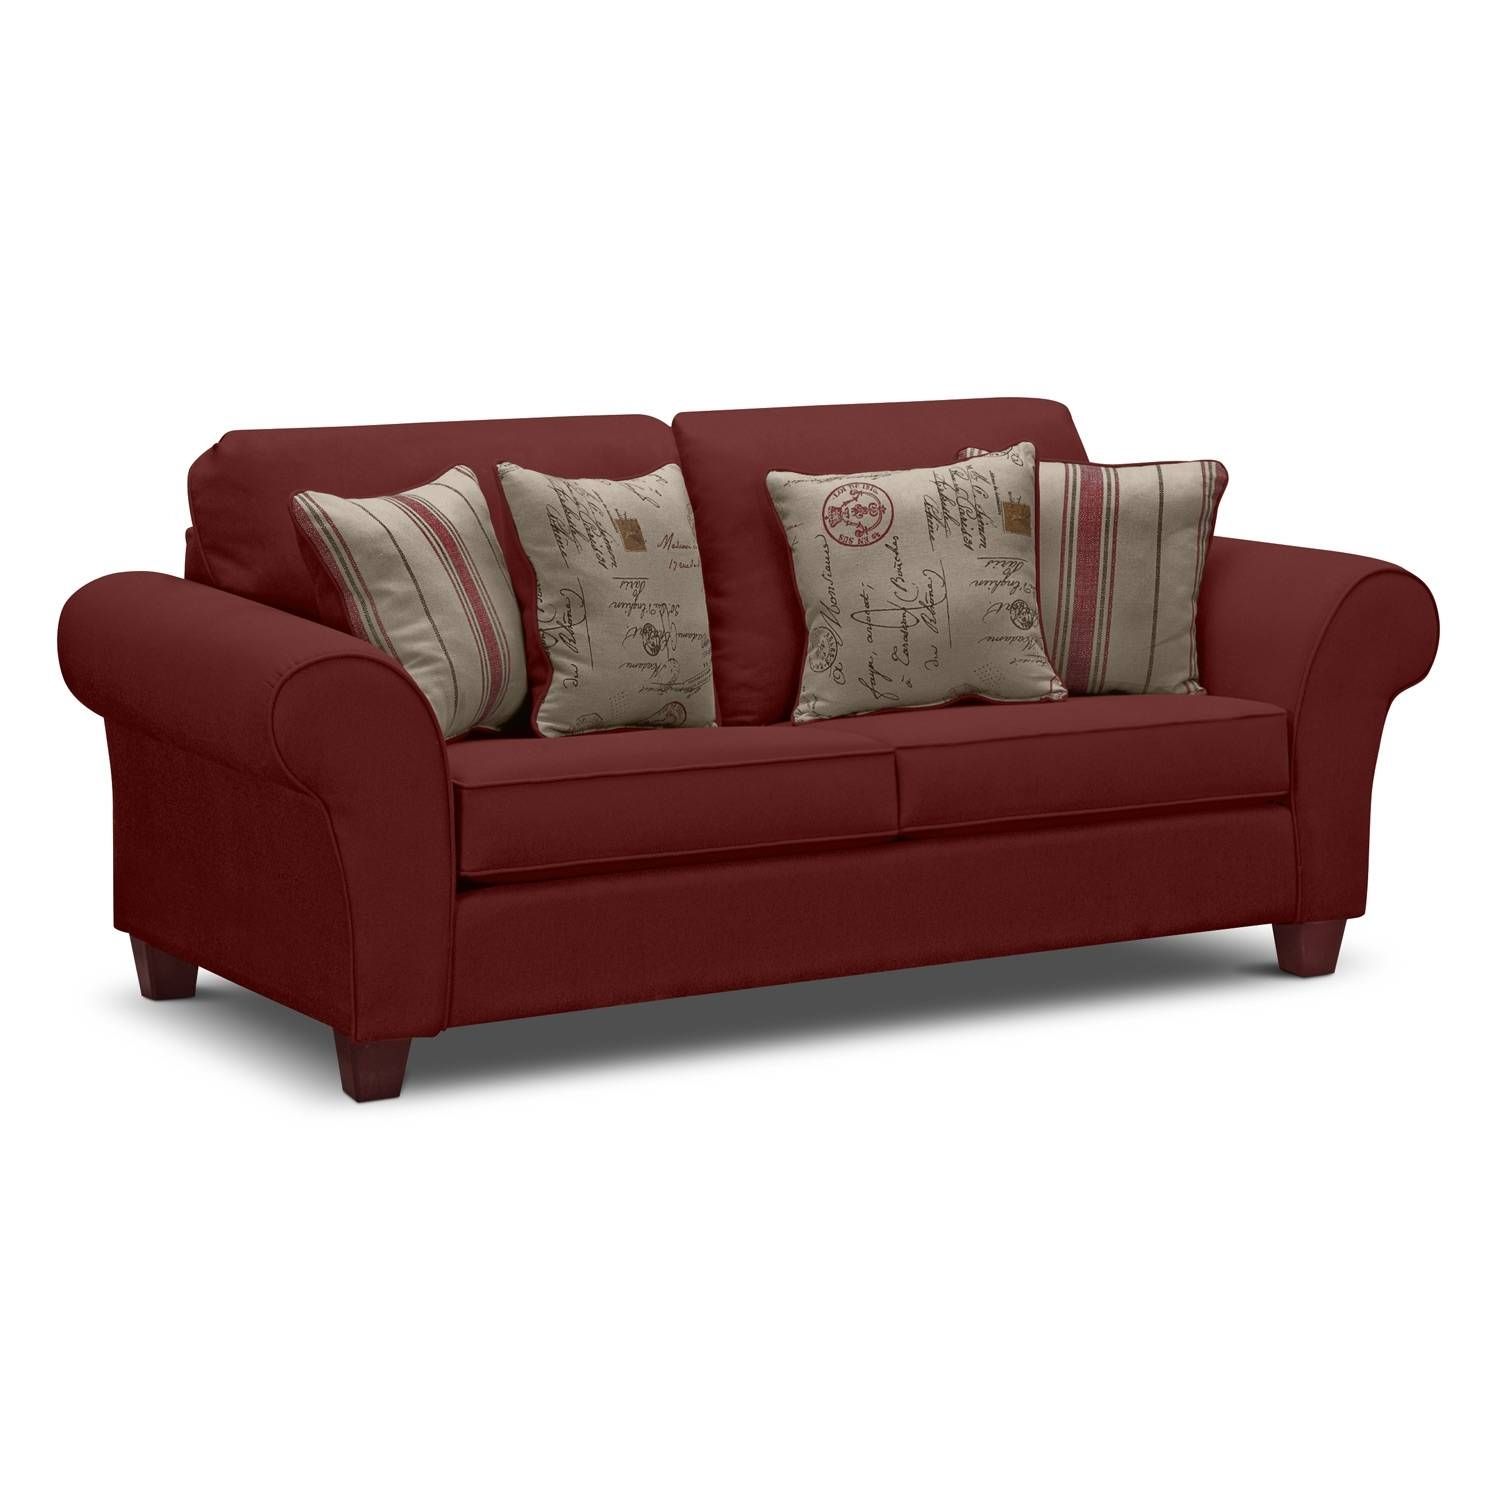 Furniture: Value City Furniture Columbia Sc | Sectional Sofas With Pertaining To Value City Sofas (View 20 of 25)